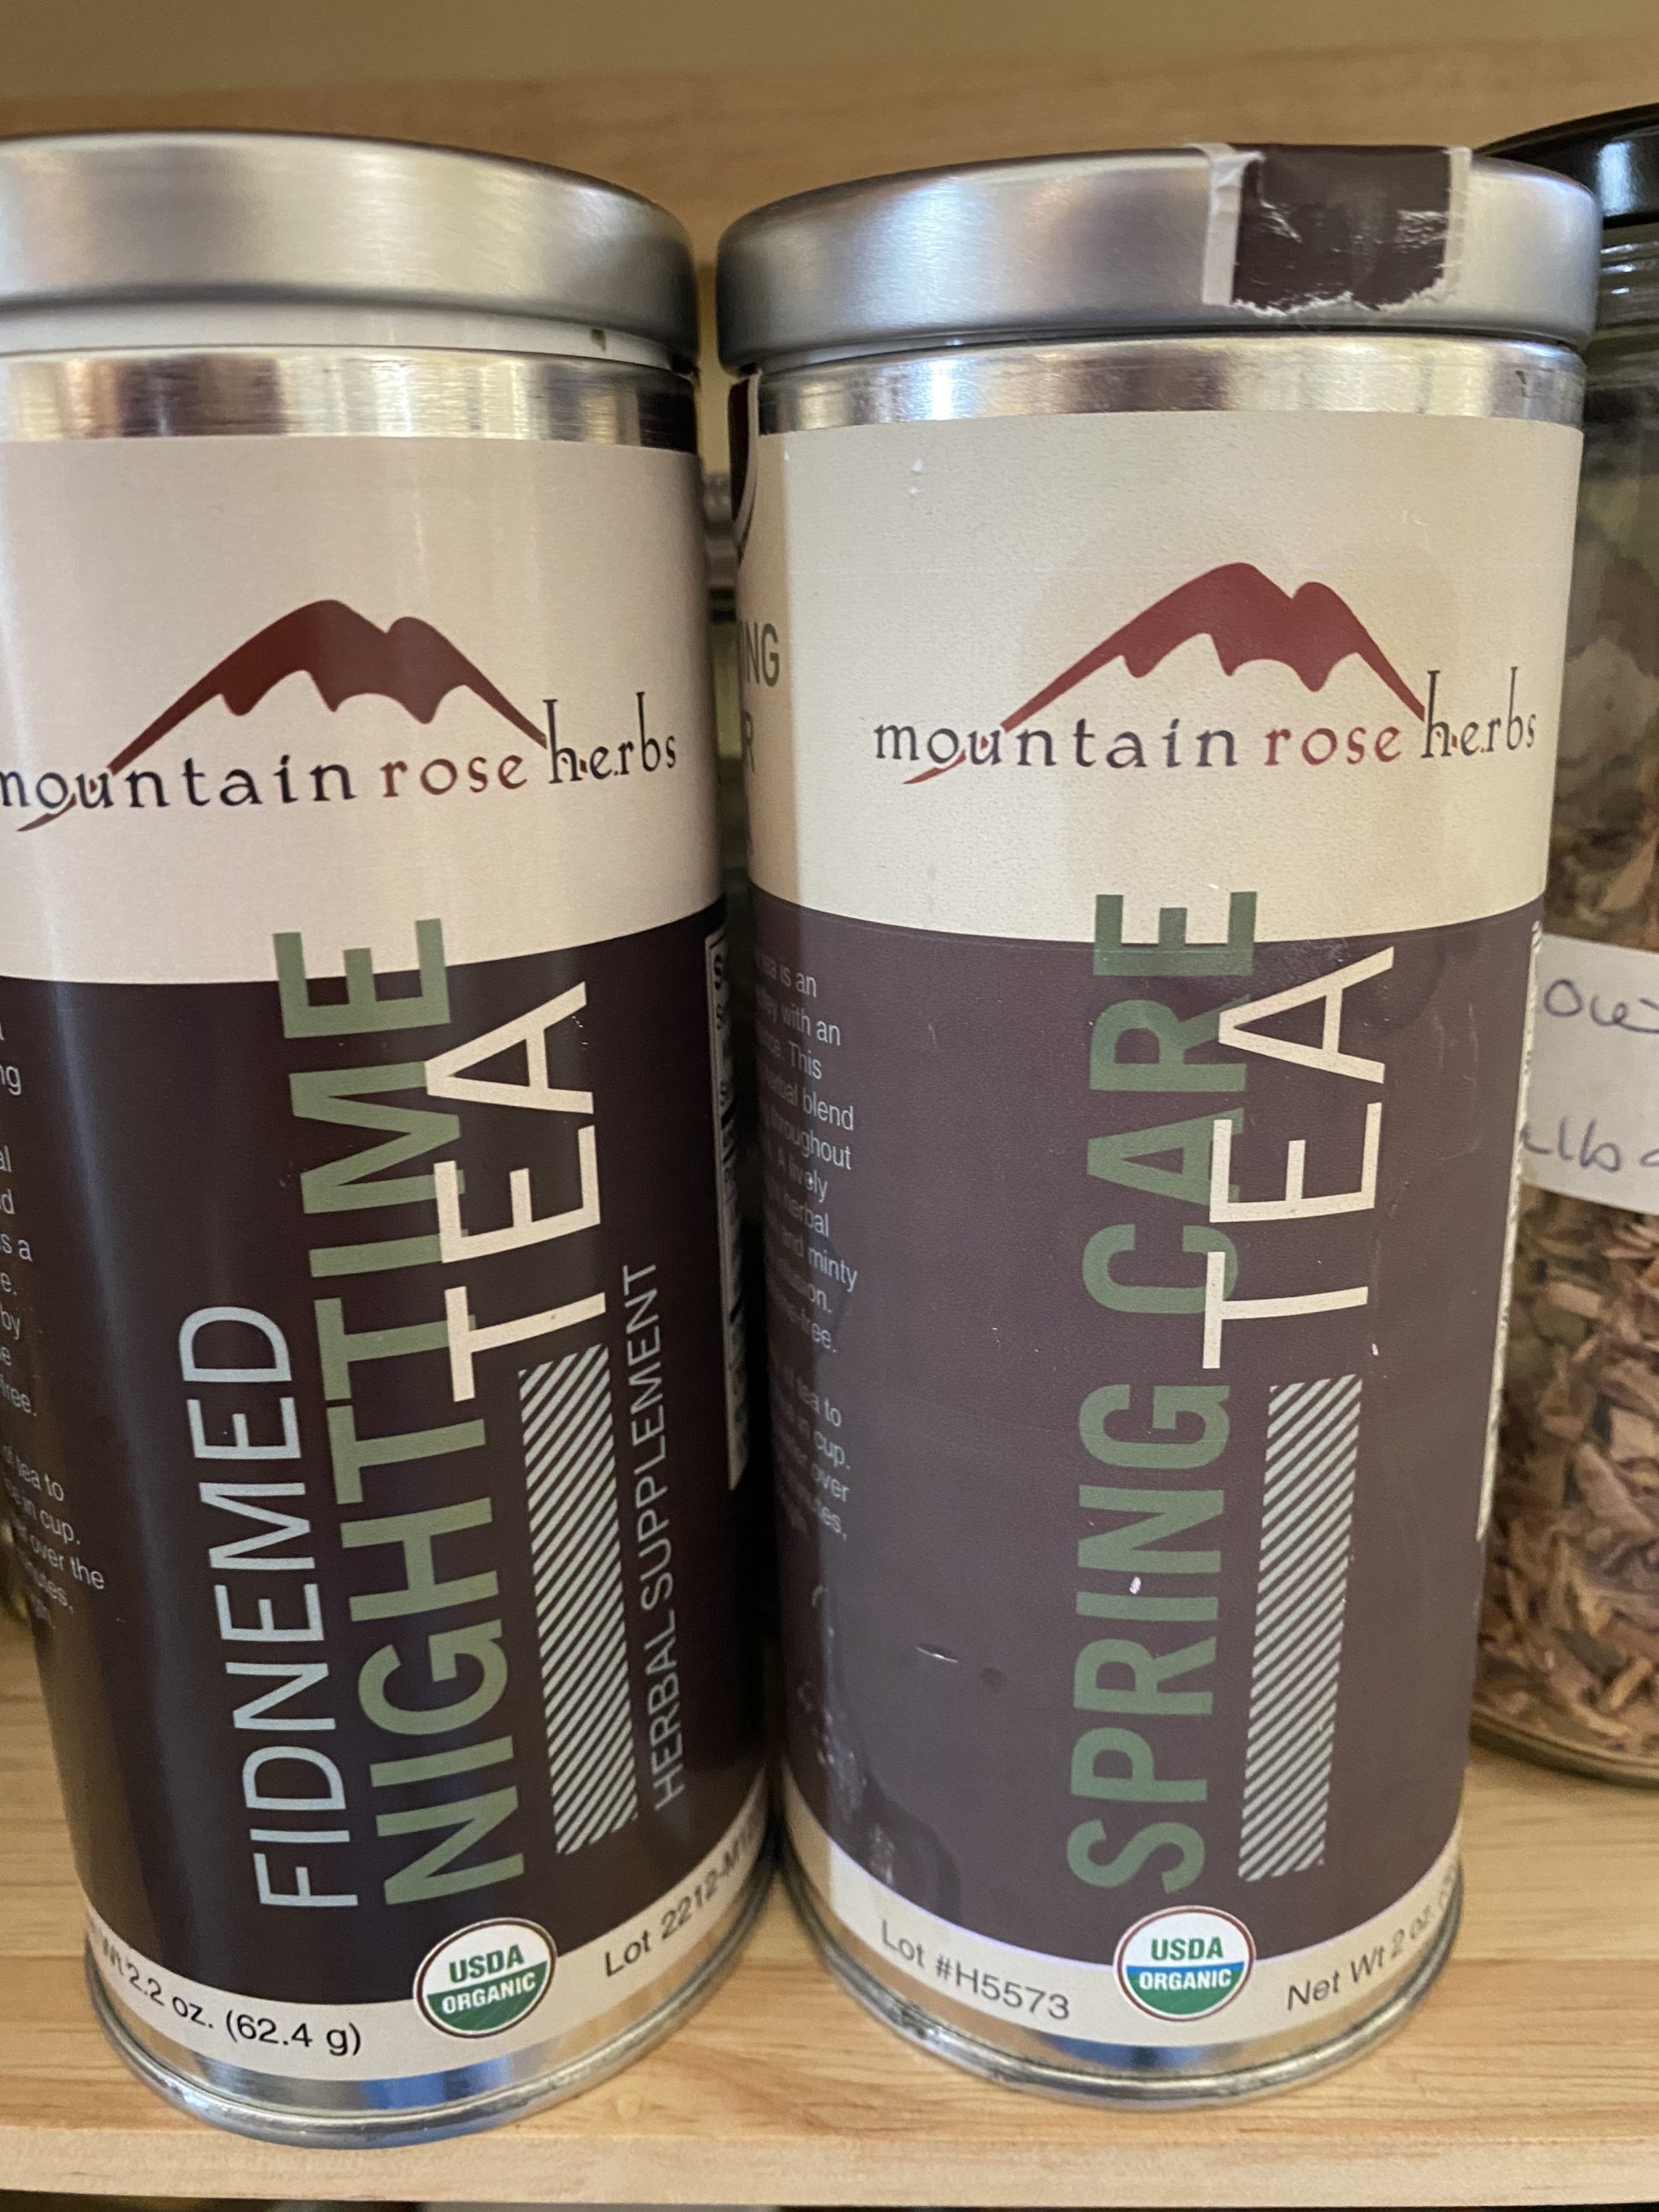 Mountain Rose Herbs tea blends in a can